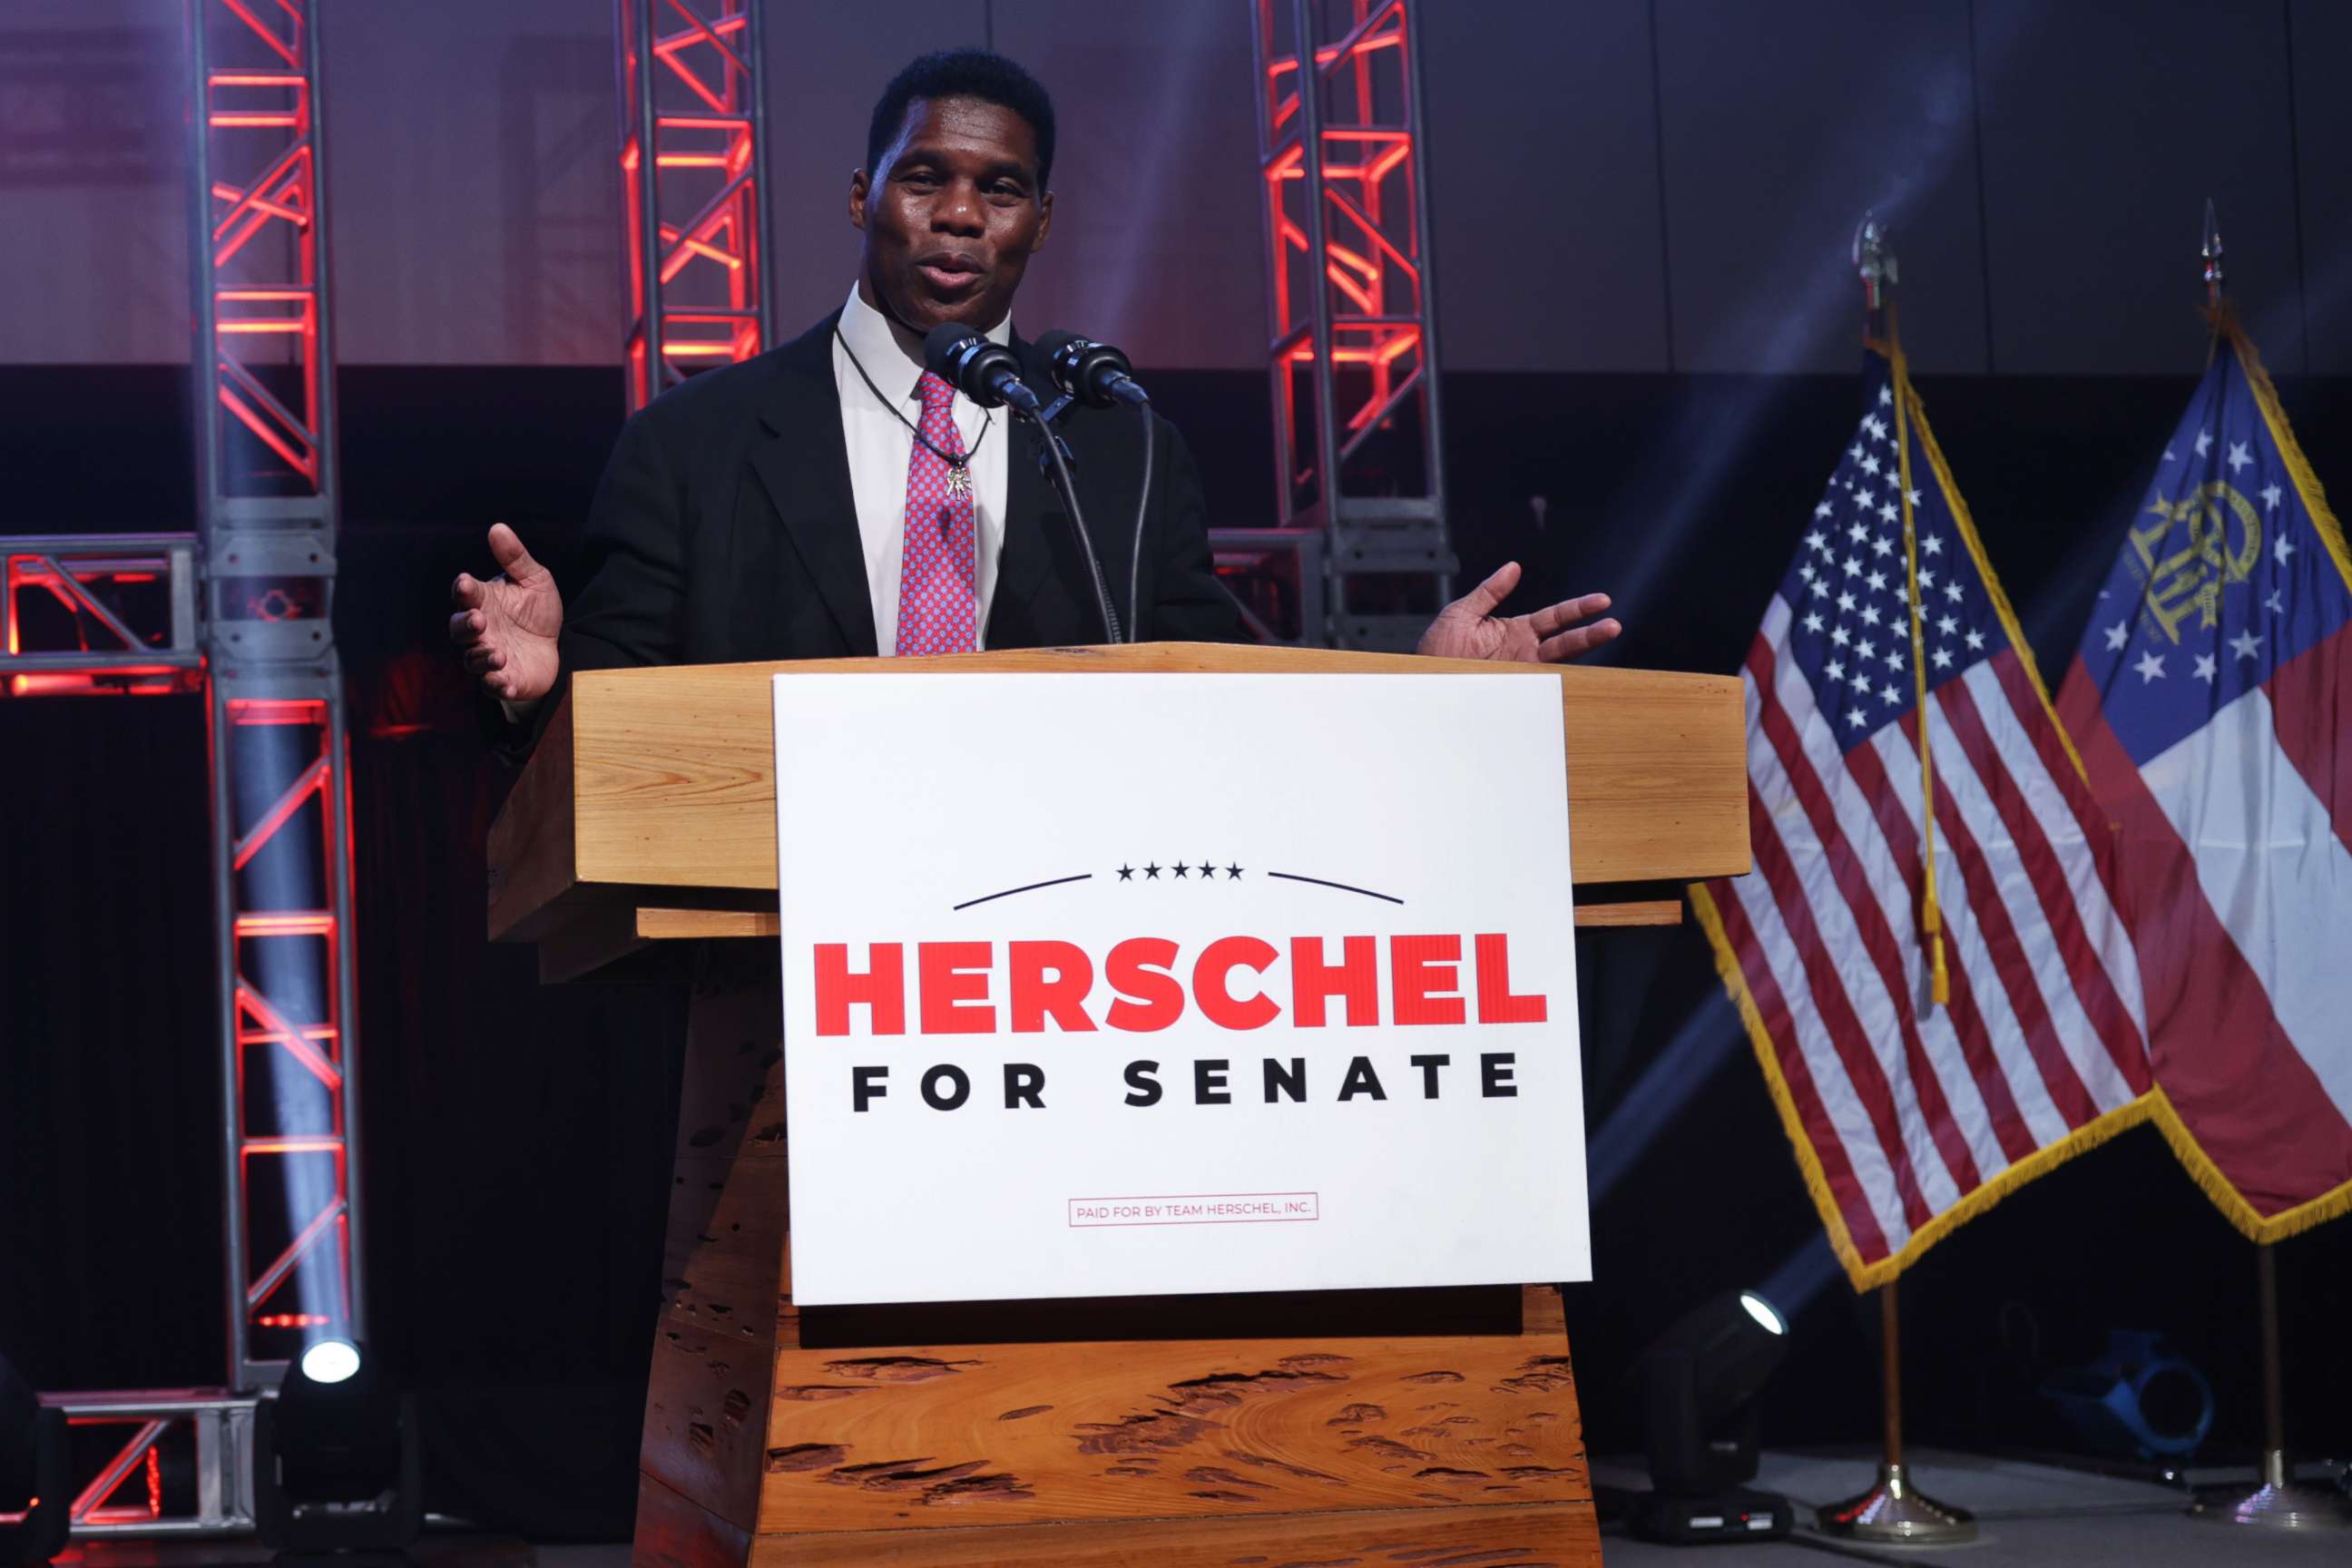 PHOTO: Georgia Republican Senate candidate Herschel Walker delivers his concession speech during an election night event, Dec. 6, 2022, in Atlanta.